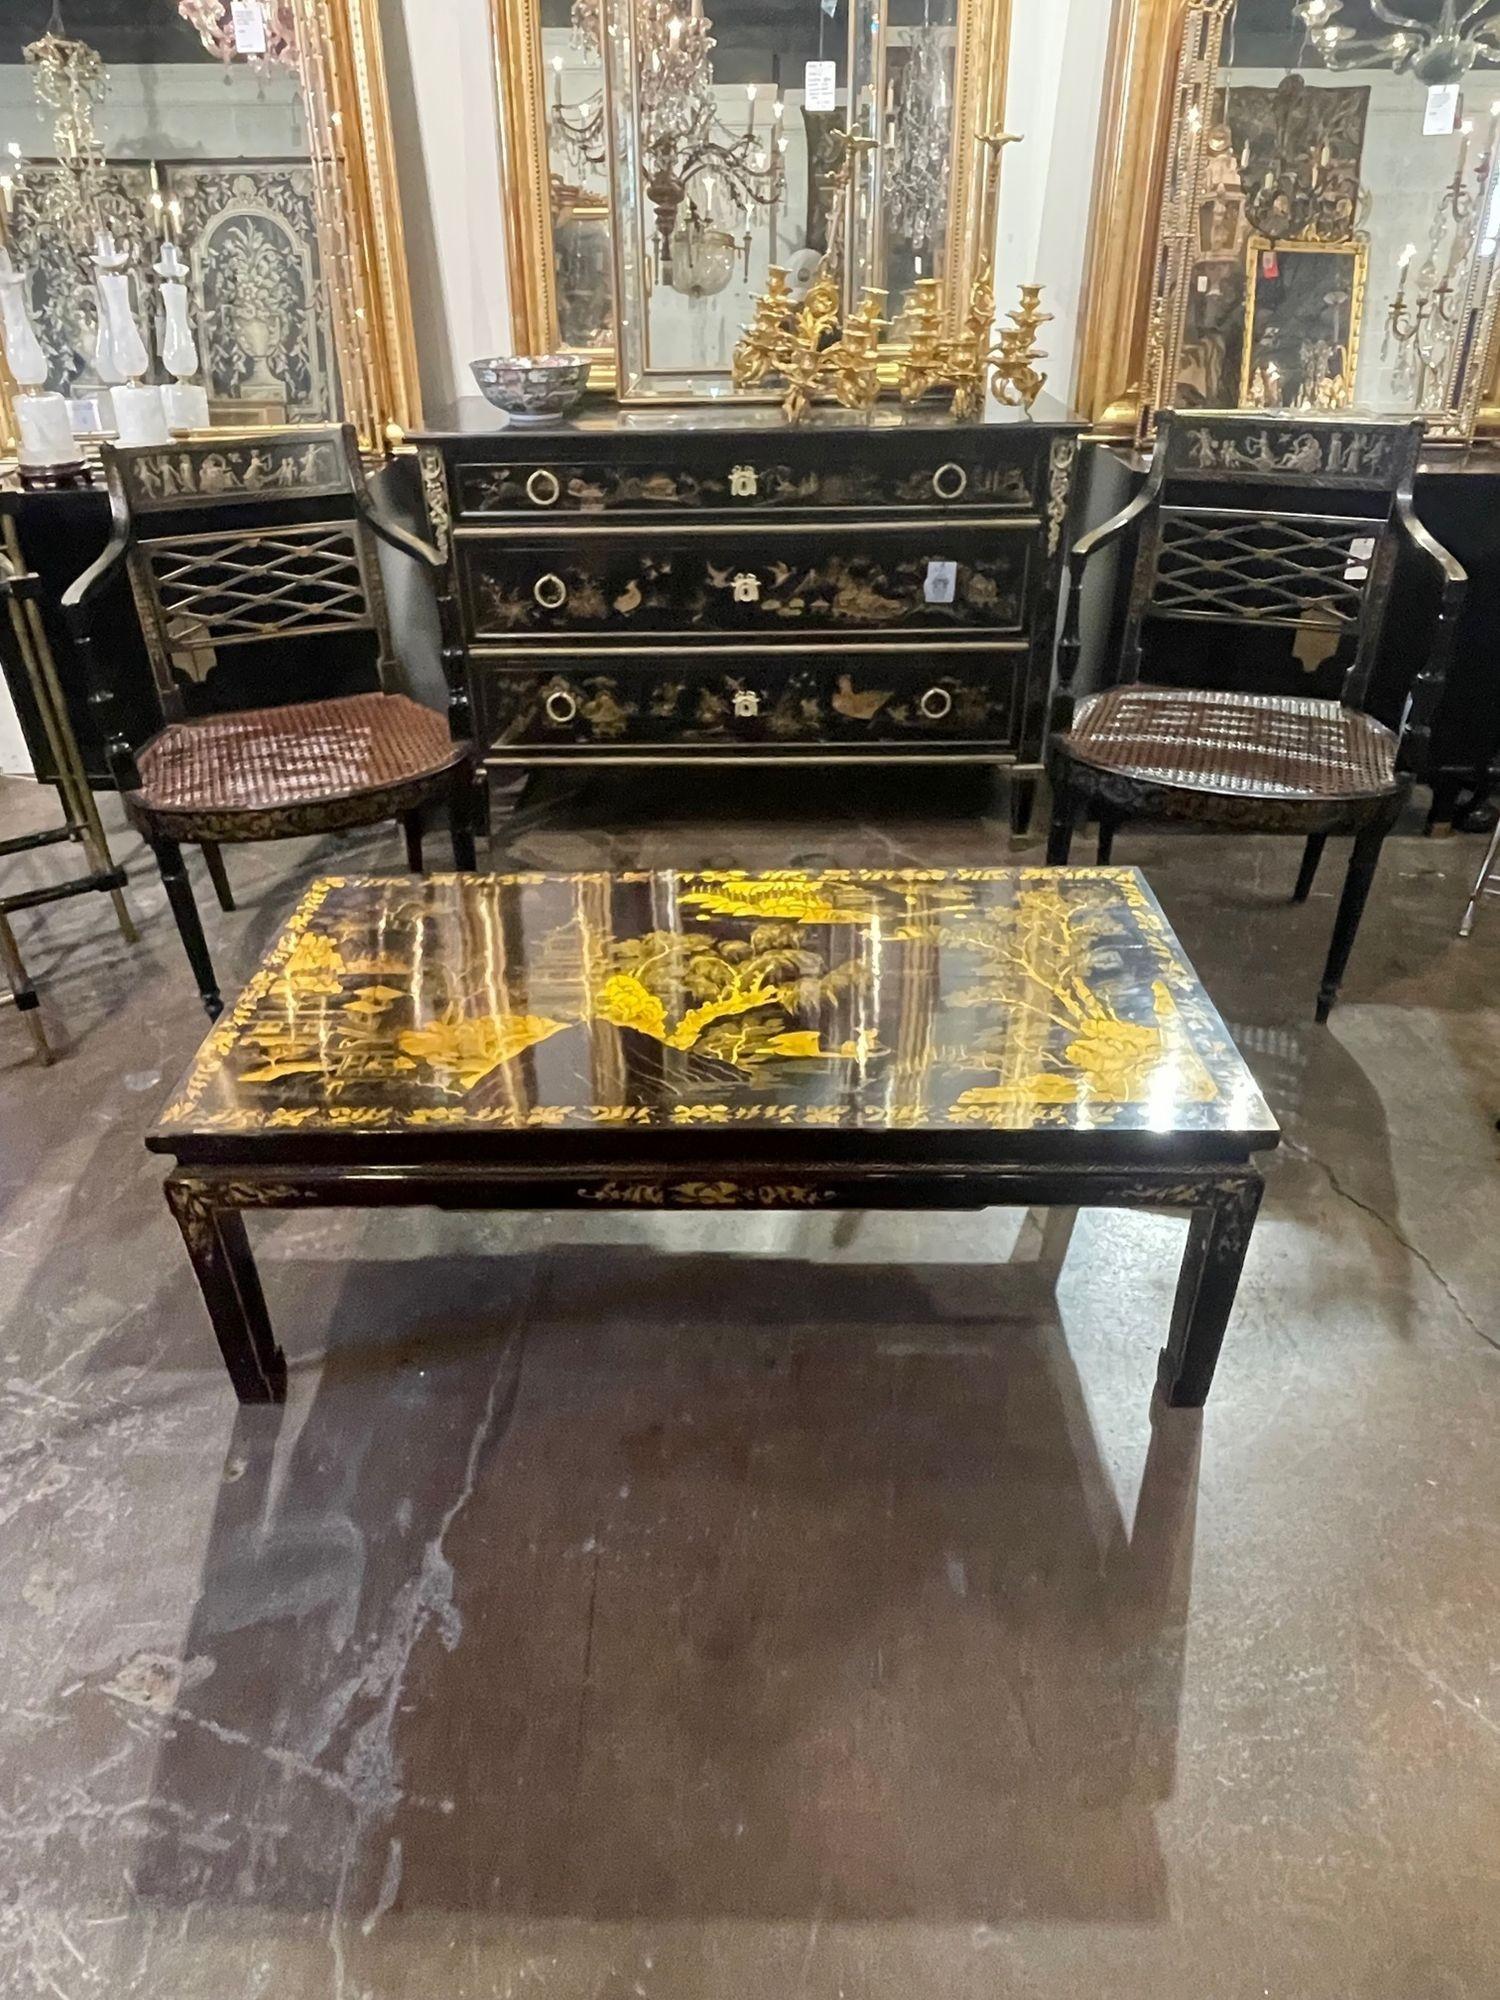 Exceptional vintage English Chinoiserie decorated coffee table. Beautifully hand painted Asian designs on a deep mahogany colored lacquered base. Very fine quality! A true work of art!